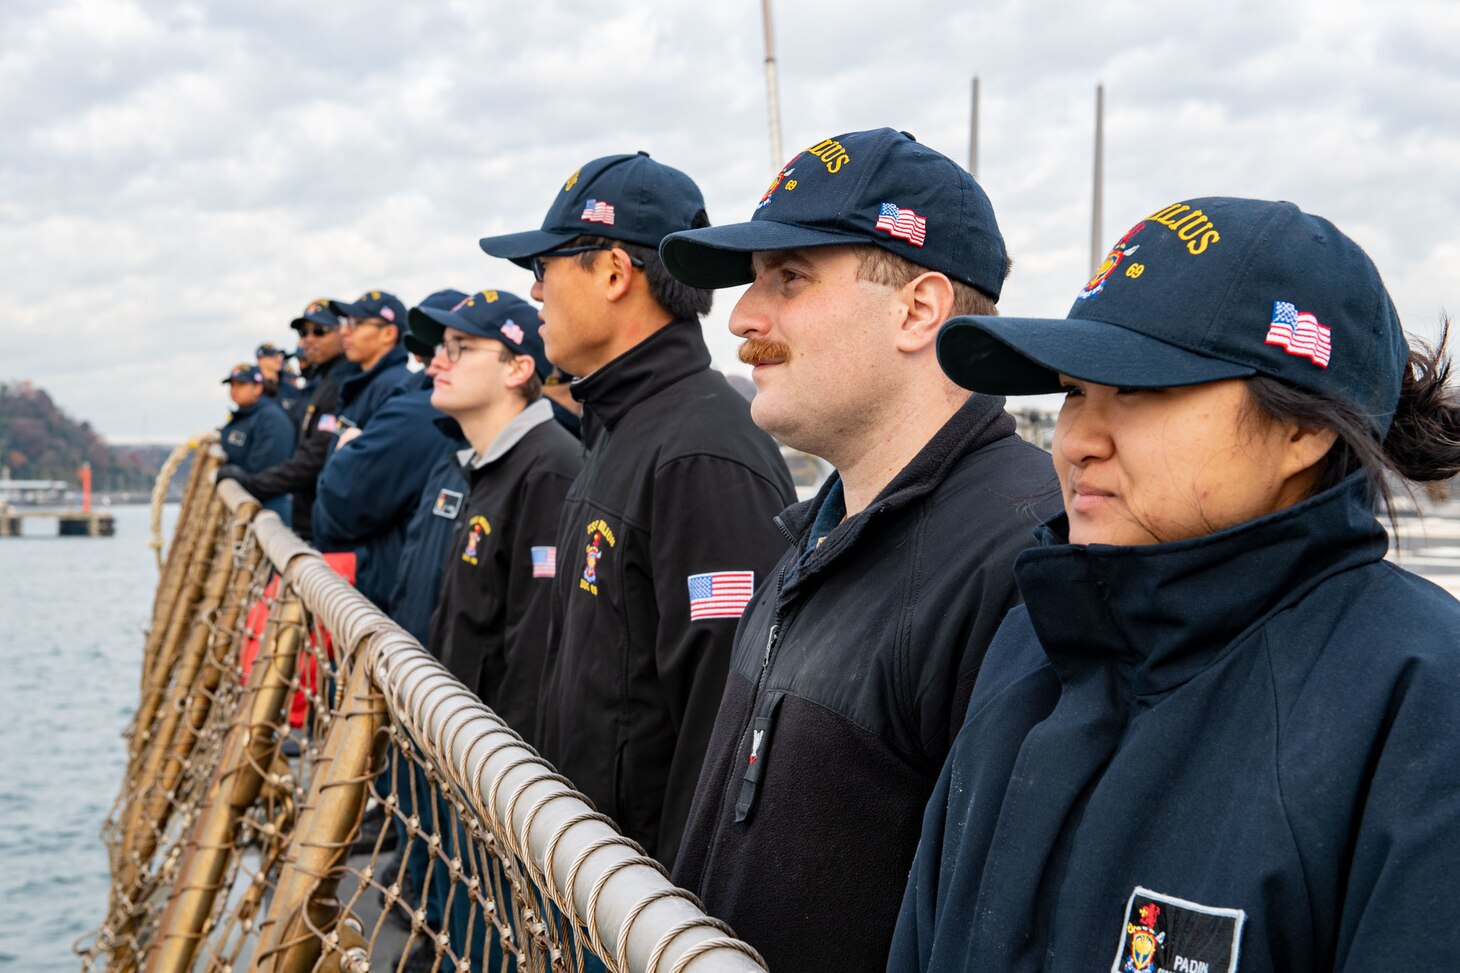 YOKOSUKA, JAPAN (Dec. 21, 2022) Sailors aboard Arleigh Burke-class guided-missile destroyer USS Milius (DDG 69) render honors as the ship returns to Commander, Fleet Activities Yokosuka, forward-deployed to Japan, Dec. 21. Milius is assigned to Commander, Task Force 71/Destroyer Squadron (DESRON) 15, the Navy’s largest forward-deployed DESRON and the U.S. 7th Fleet’s principal surface force. (U.S. Navy photo by Mass Communication Specialist 2nd Class Richard Cho)